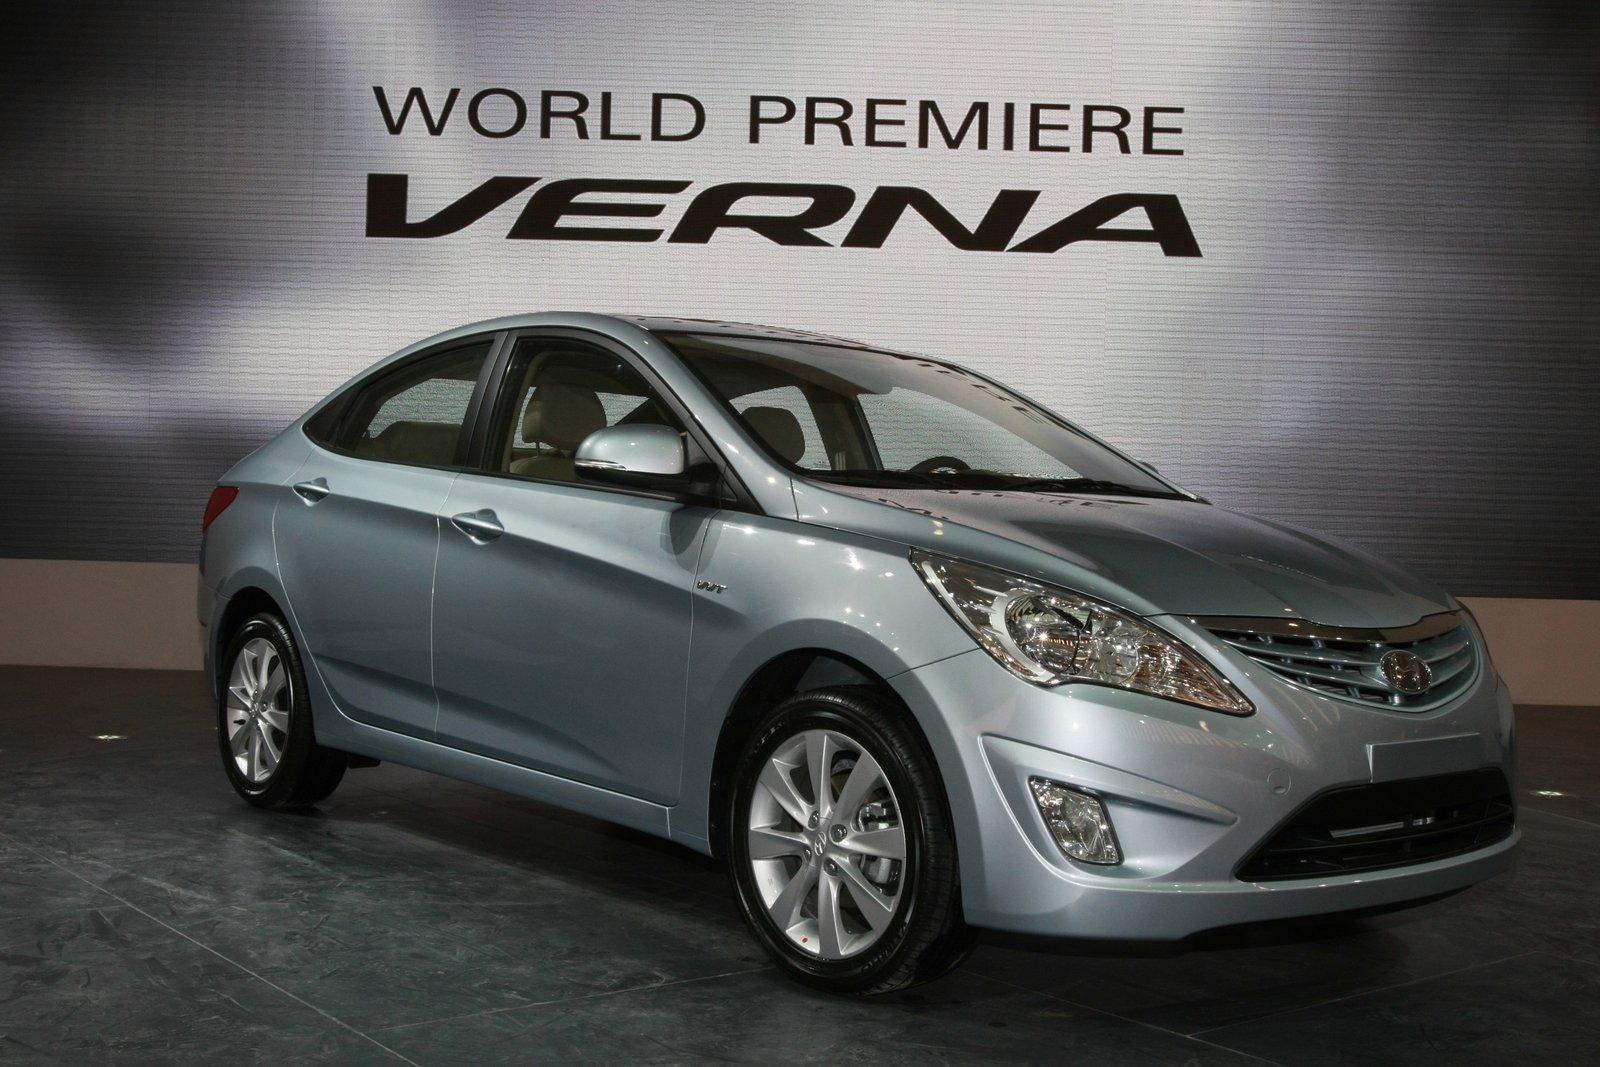 Hyundai Verna | Accent photo pictures at high resolution